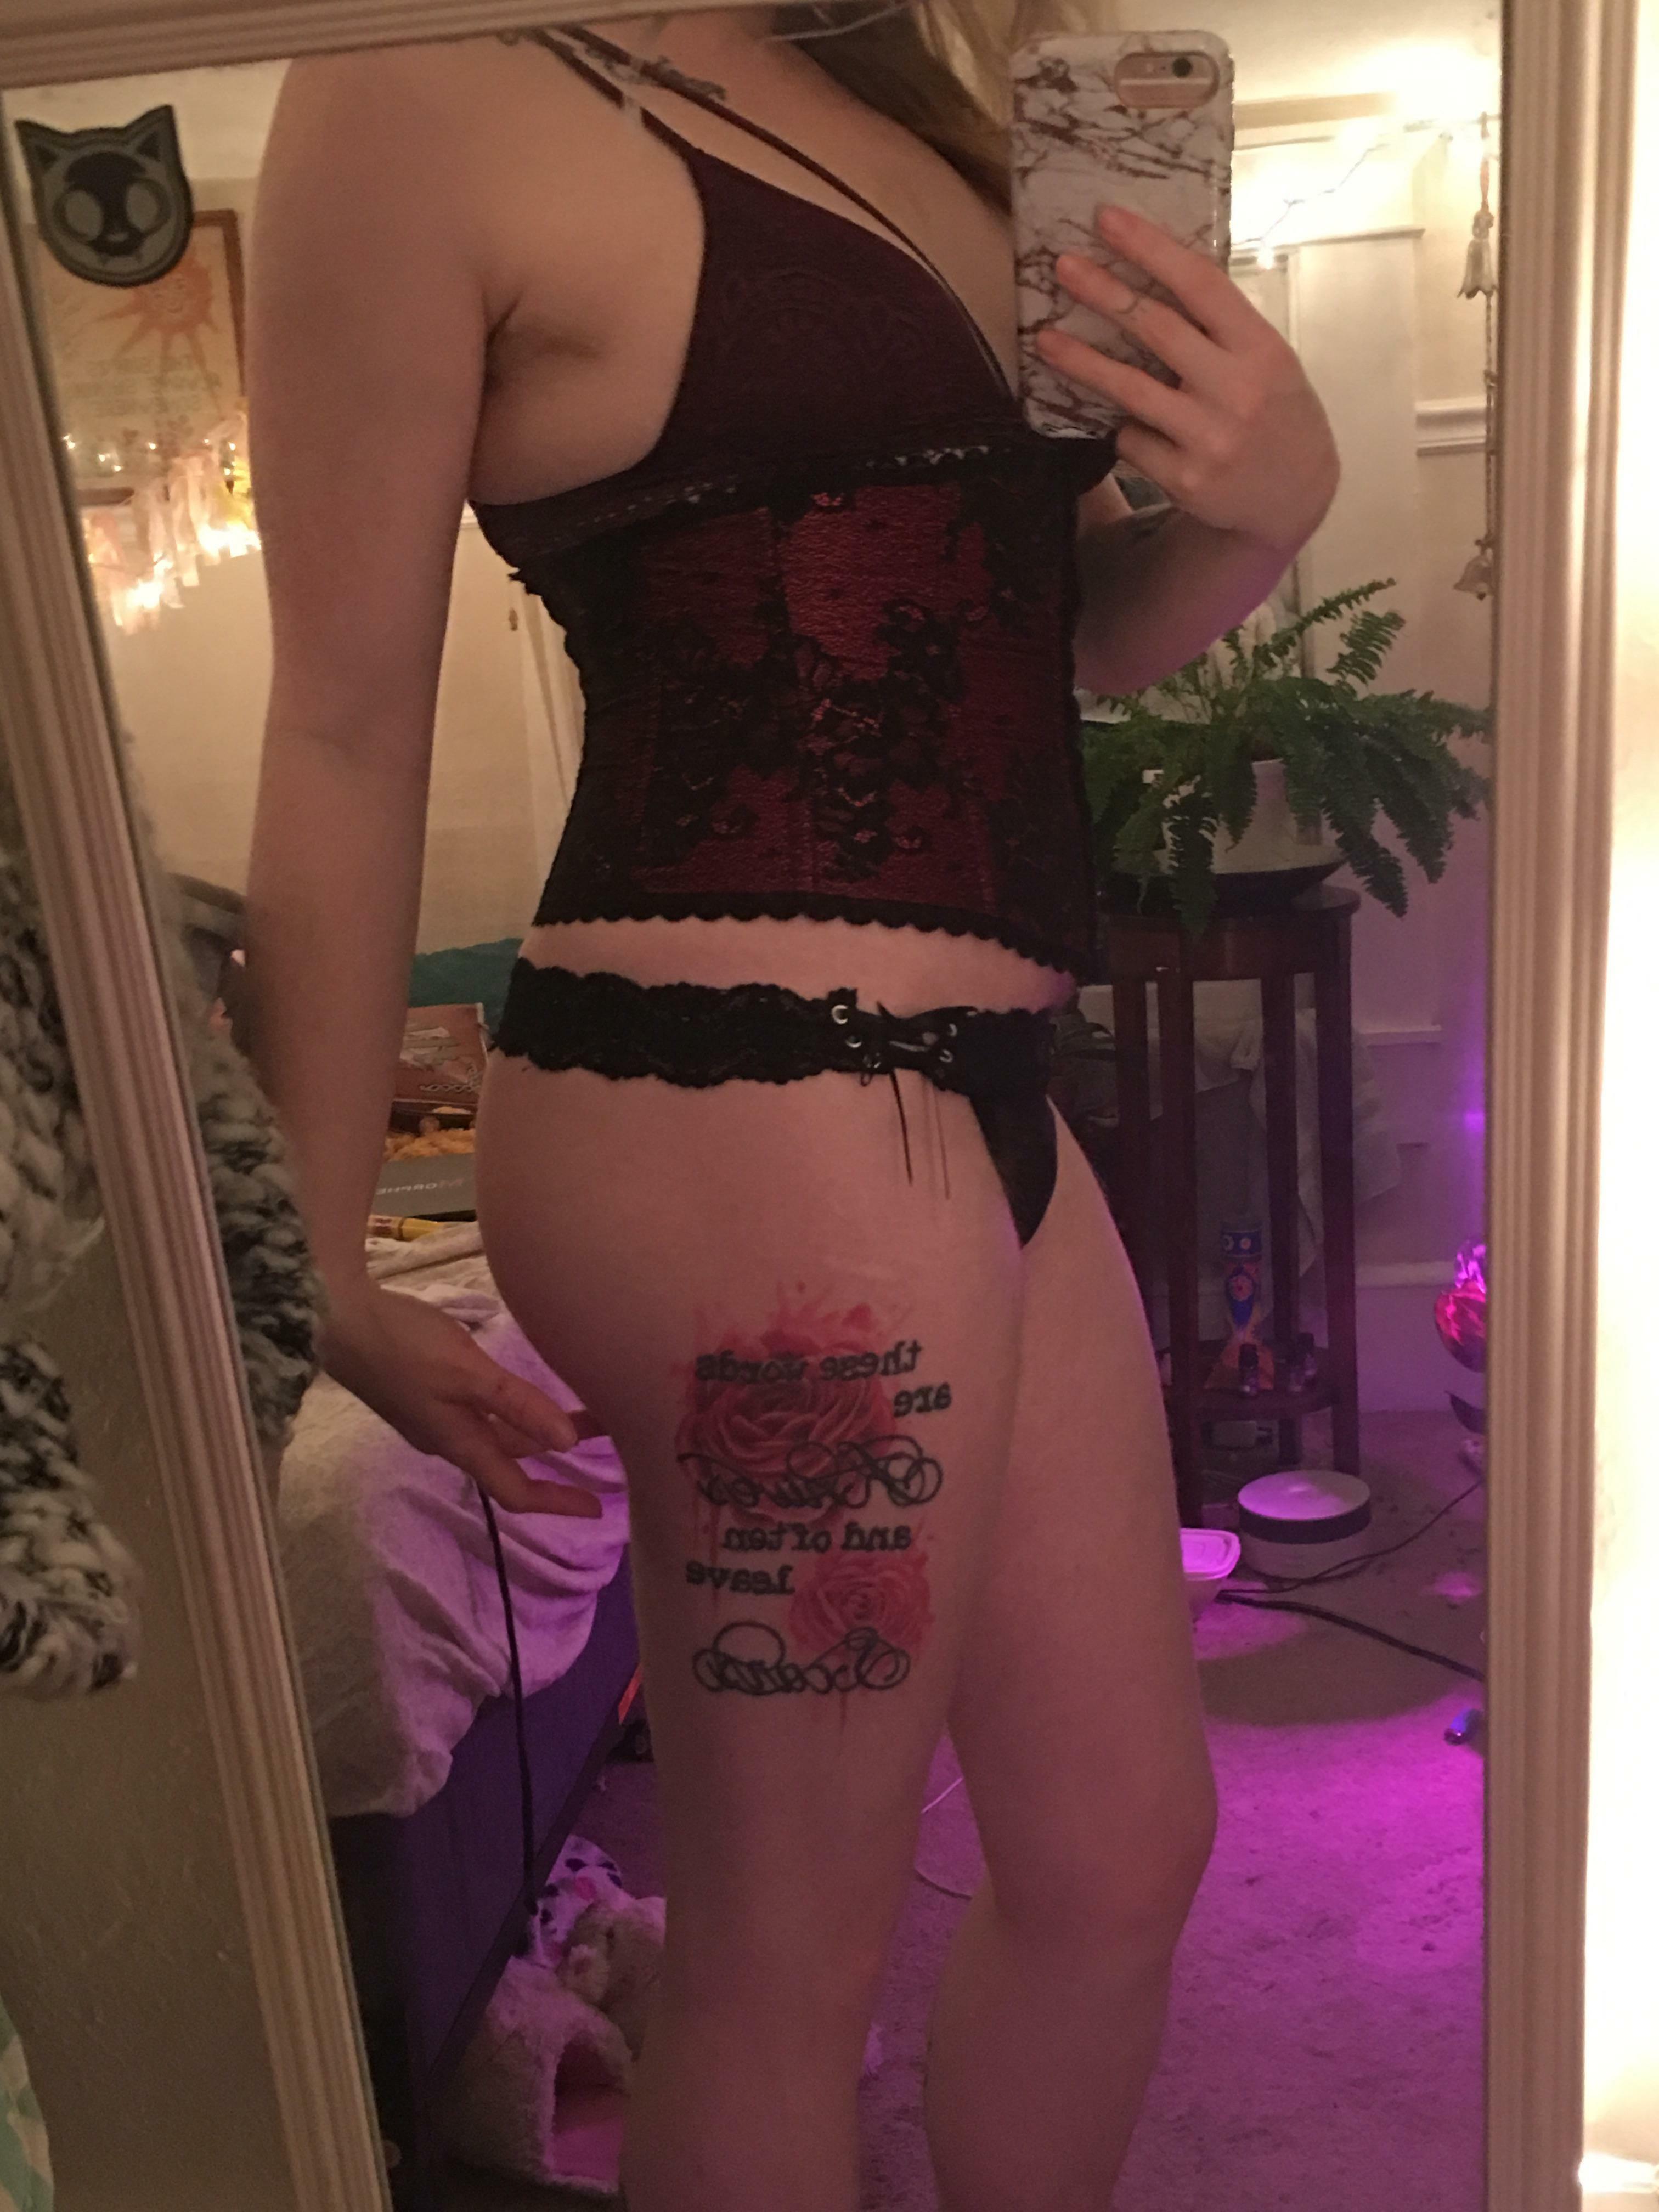 my outfit to tease my caged cuck in tonight after giving him a notebook full of my sexual adventures with other